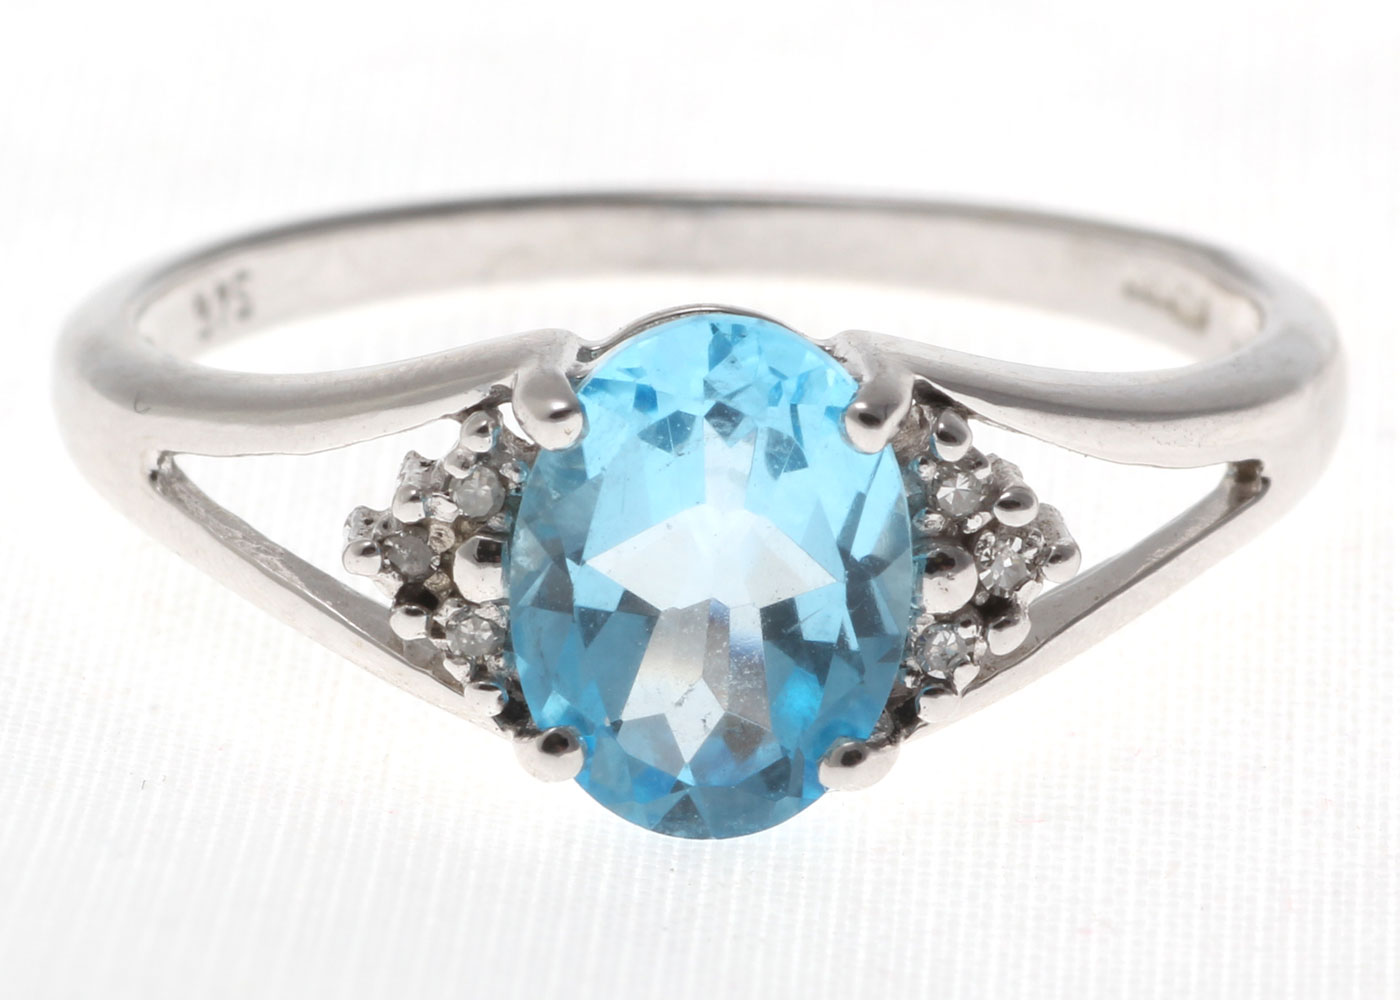 9ct White Gold Diamond And Blue Topaz Ring - Image 5 of 6